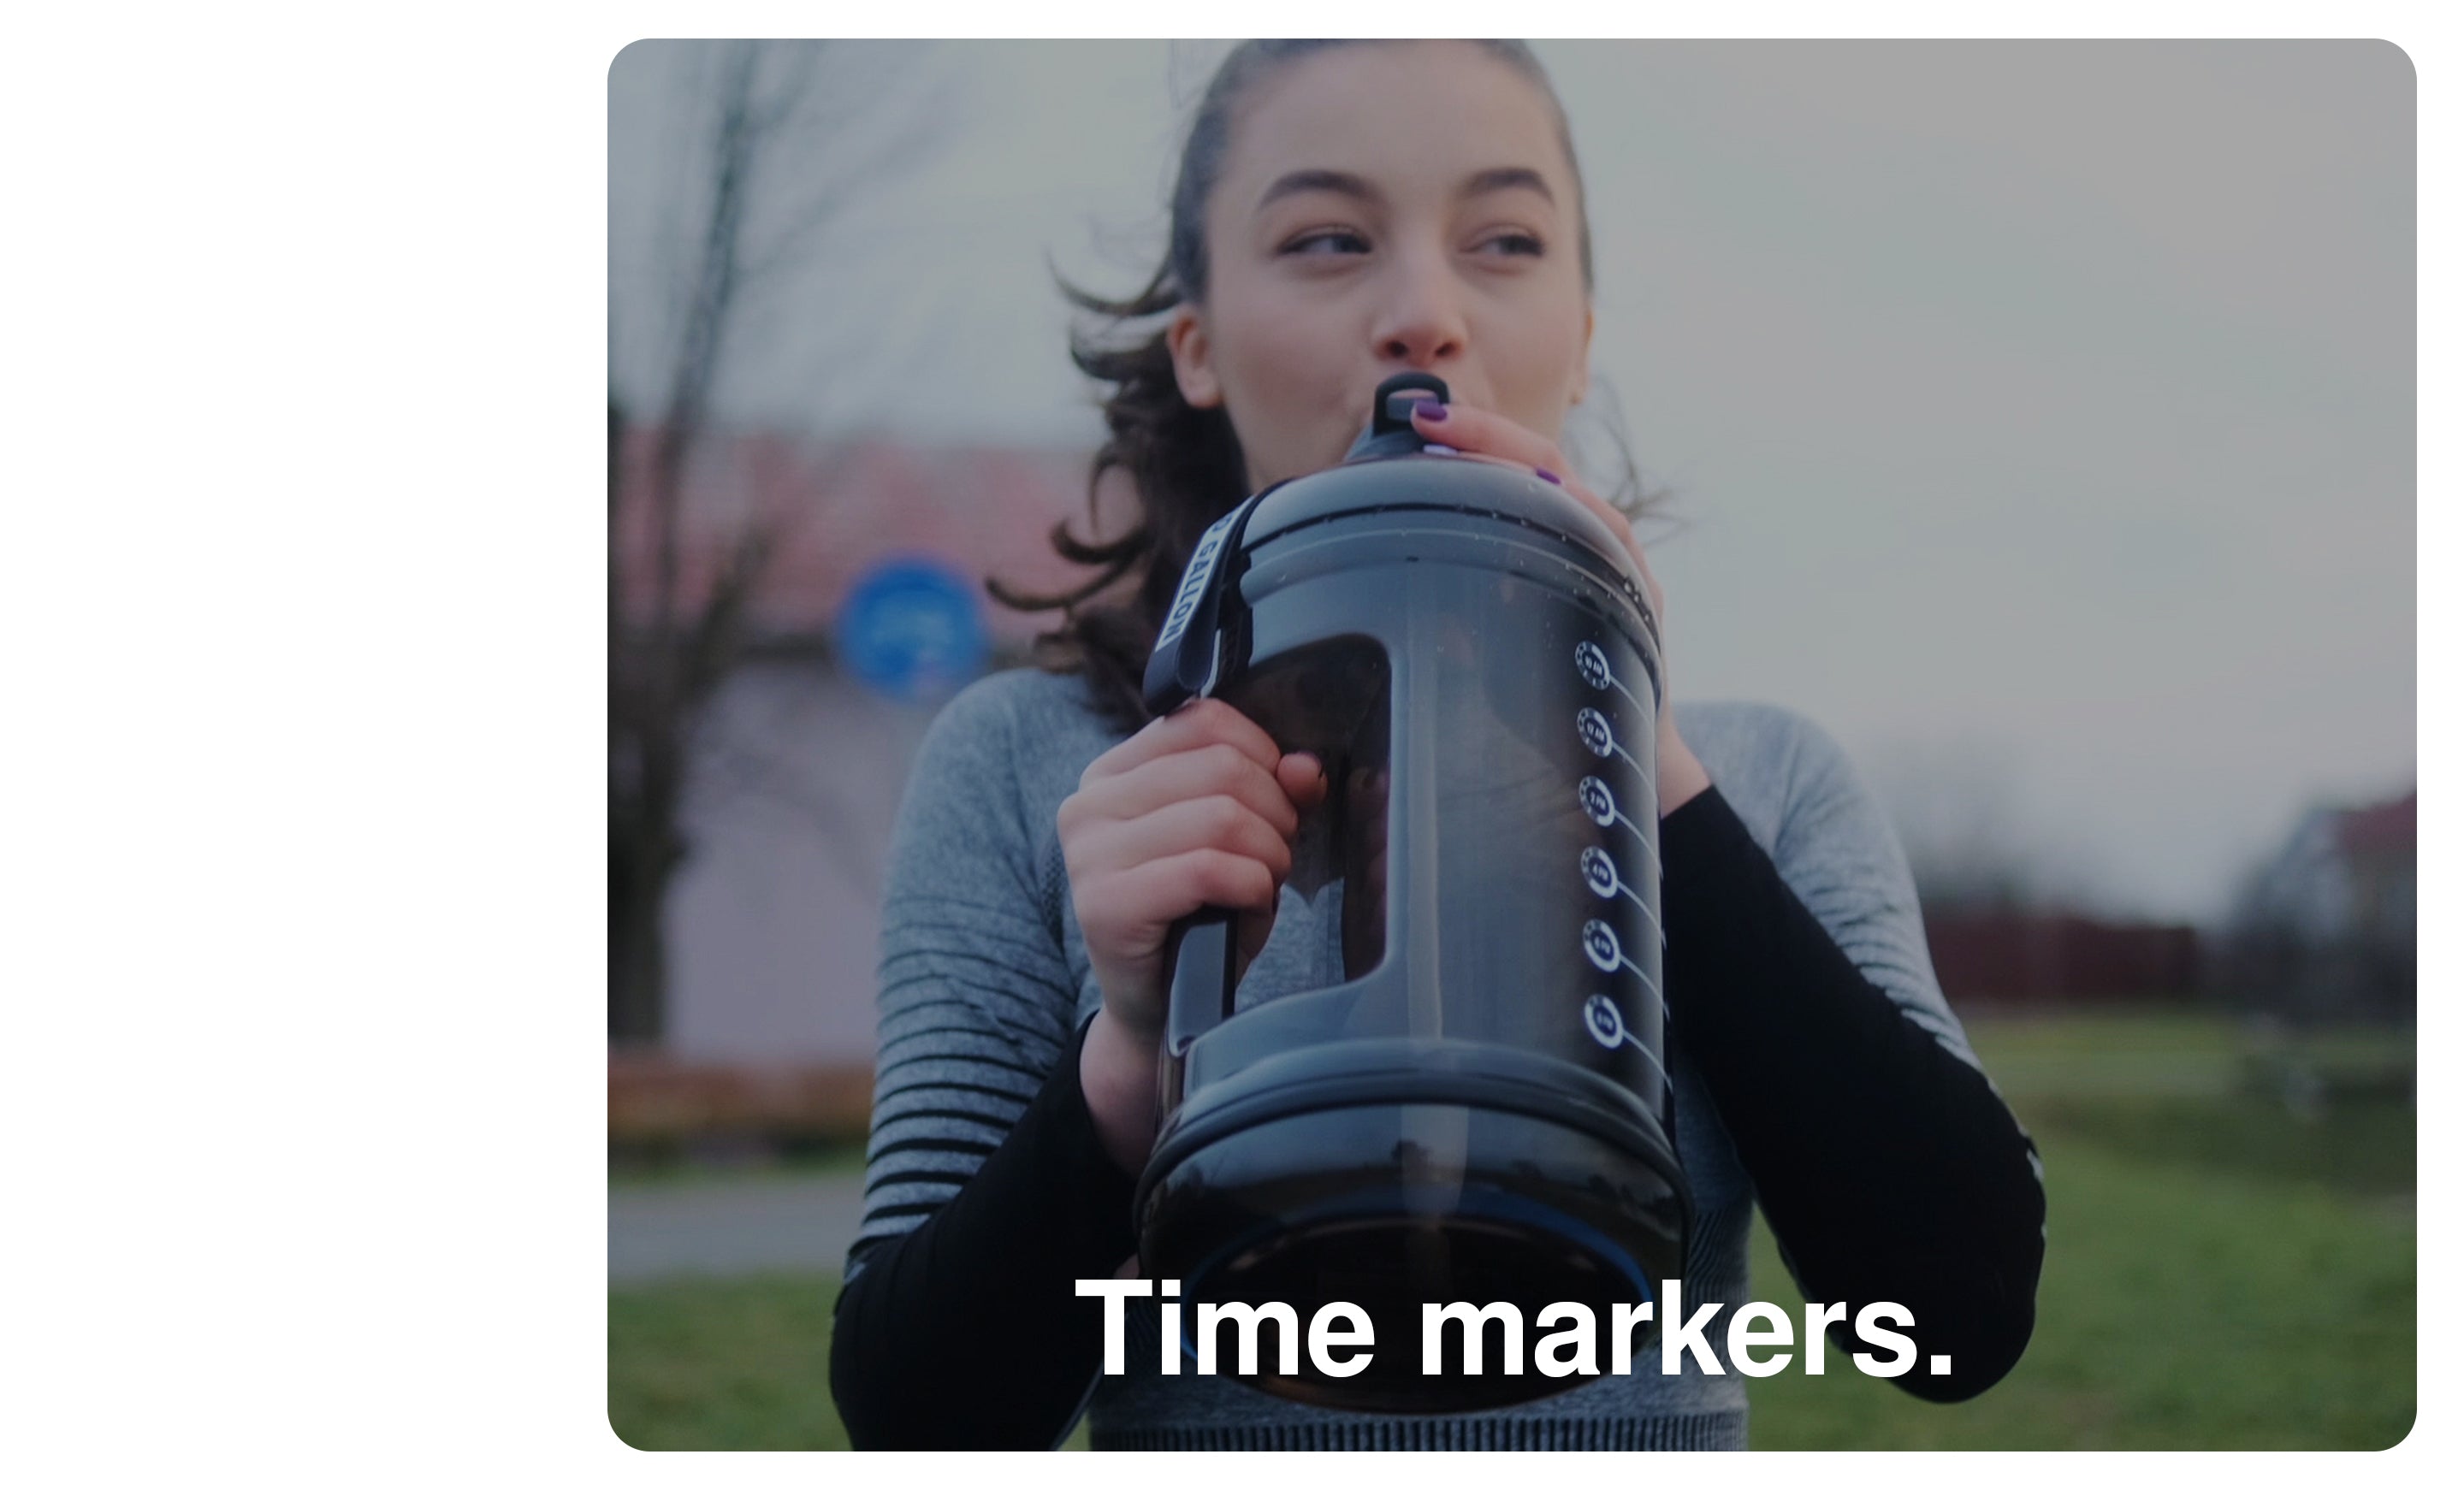 time markers hydro gallon 1 one gallon water bottle jug straw spout lid sleeve shoulder carrying strap pocket for phone keys motivational time markers insulated bpa free leakproof side handle